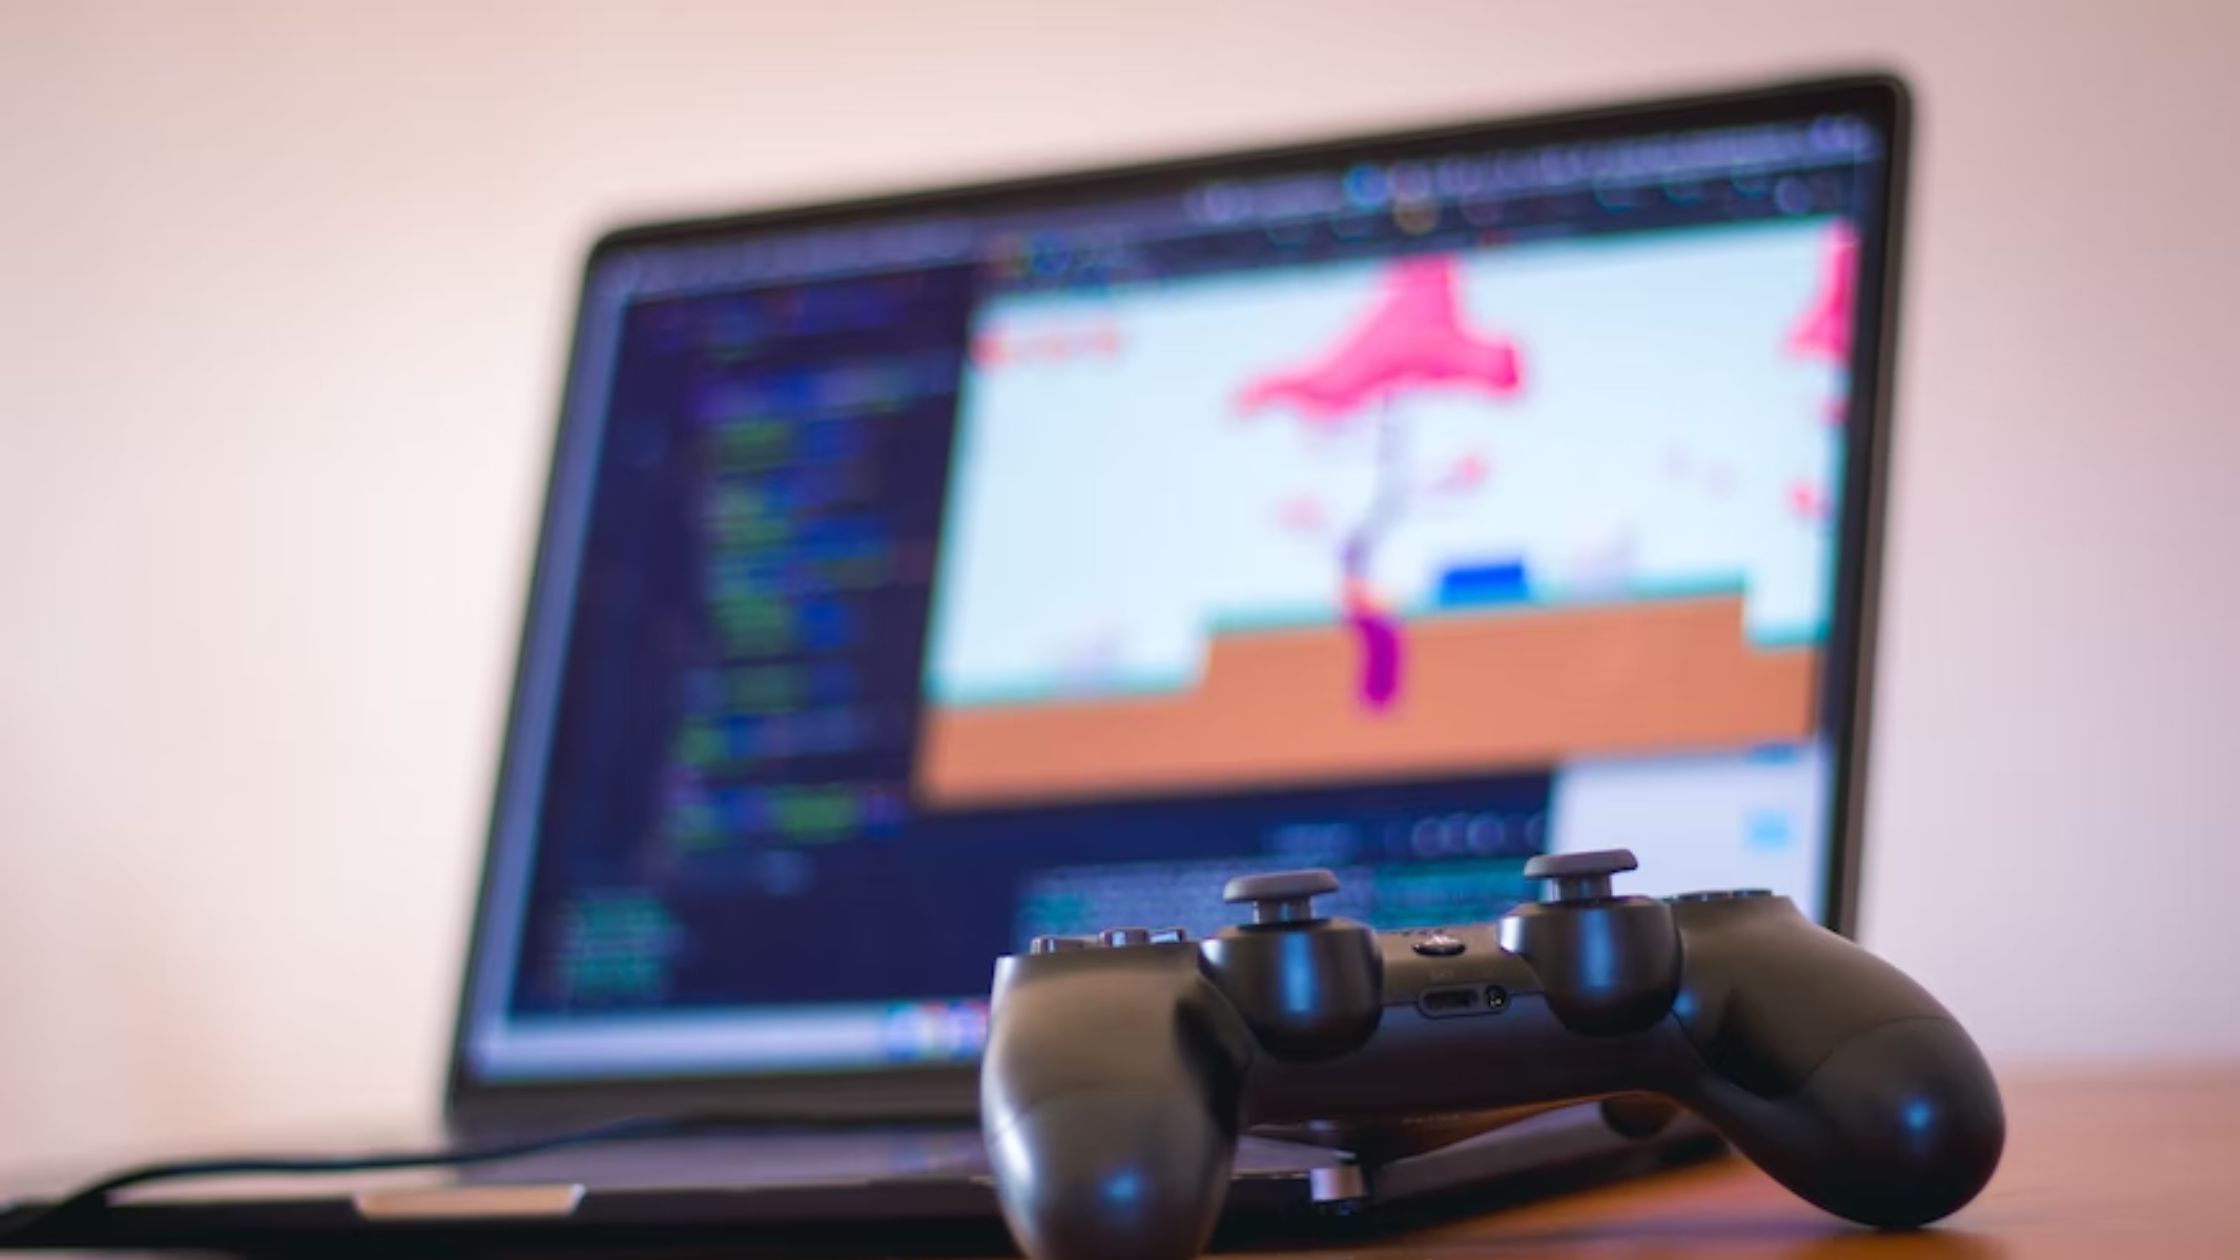 10 Tips to Play Games Online Without Risk